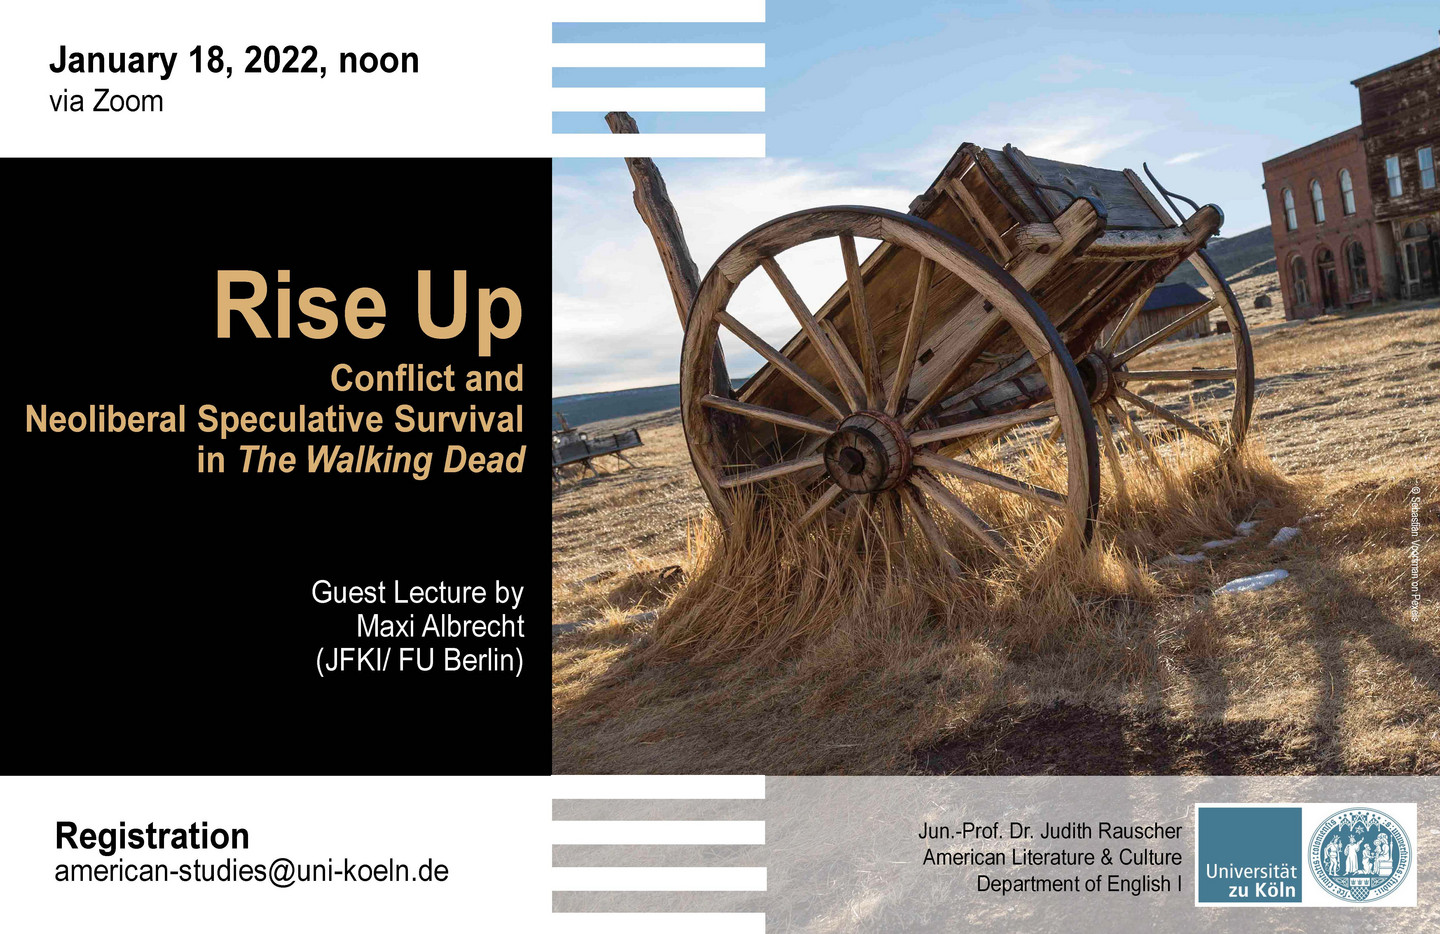 Poster of Guest Lecture depicting a broken carriage in a western town